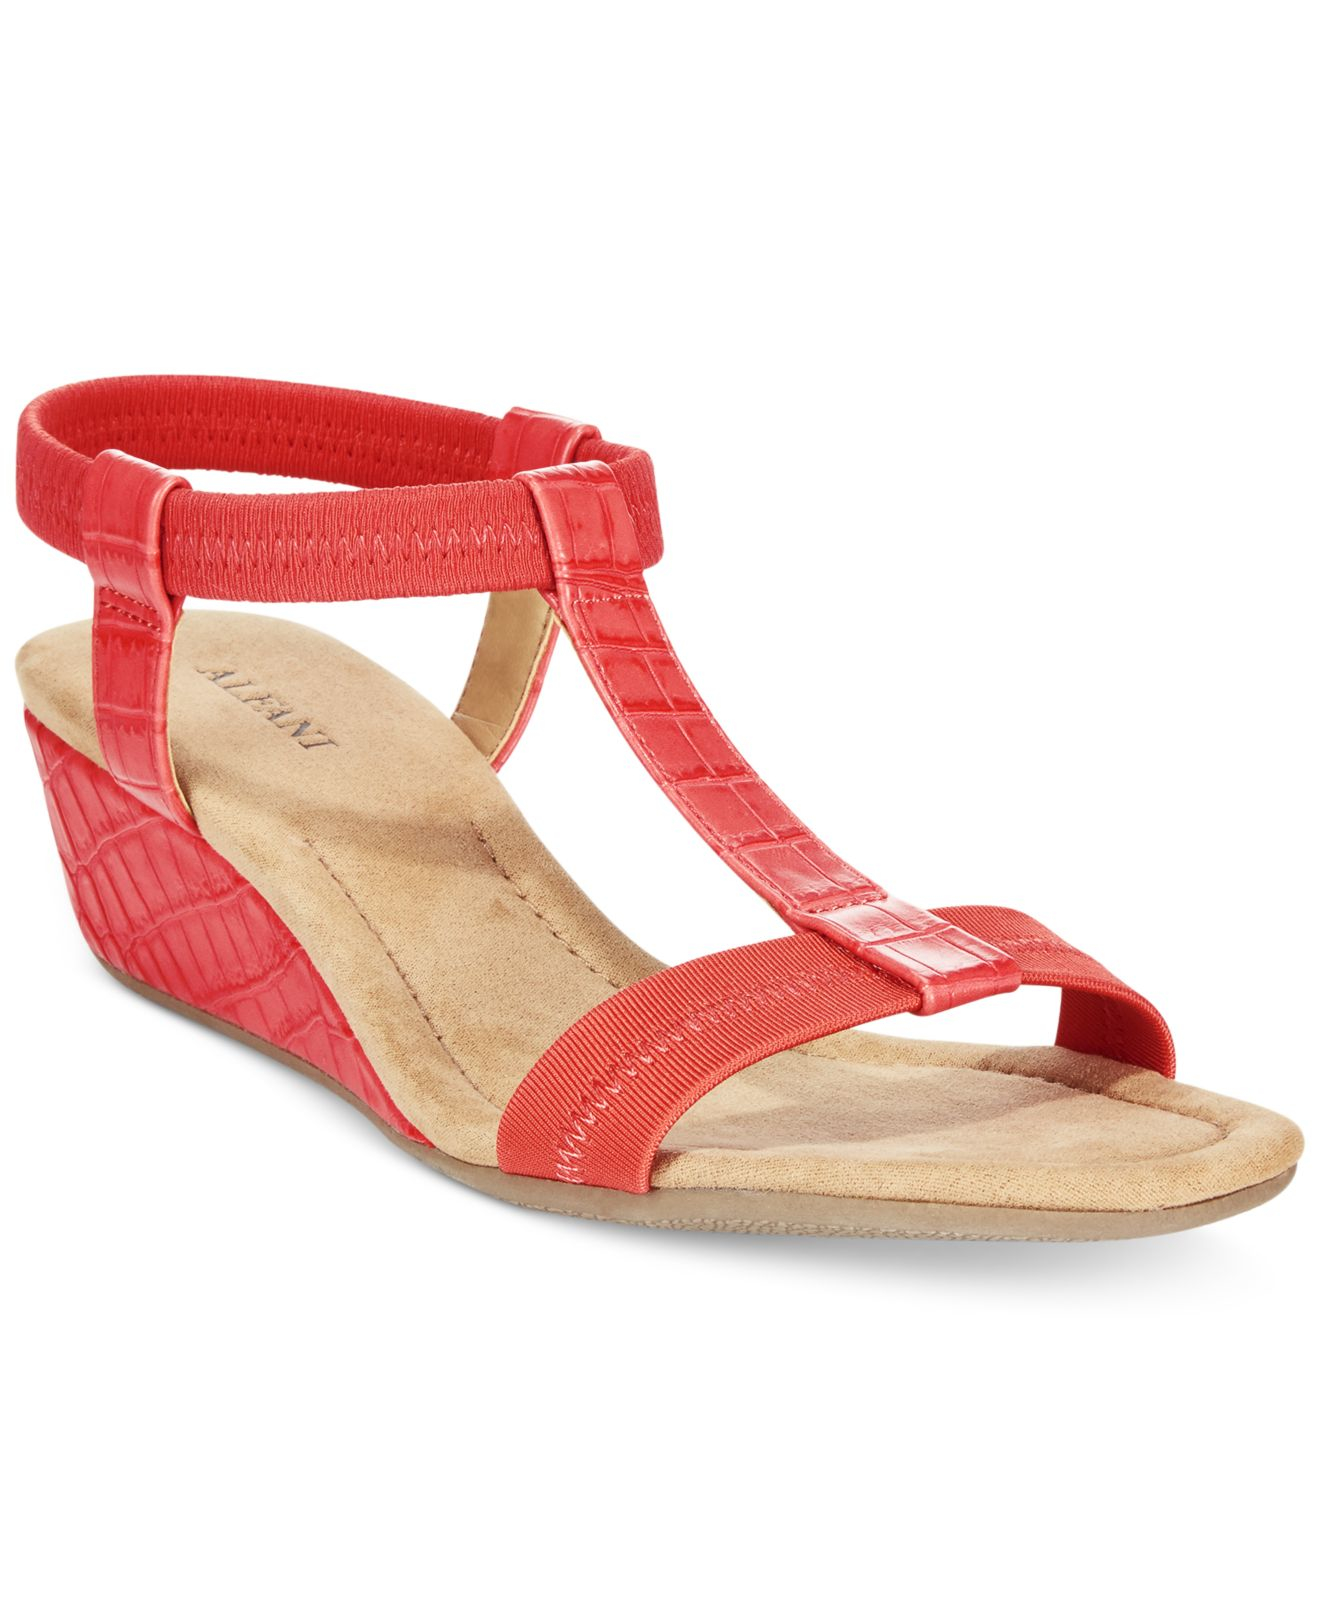 Alfani Women's Voyage Wedge Sandals, Only At Macy's in Red - Lyst